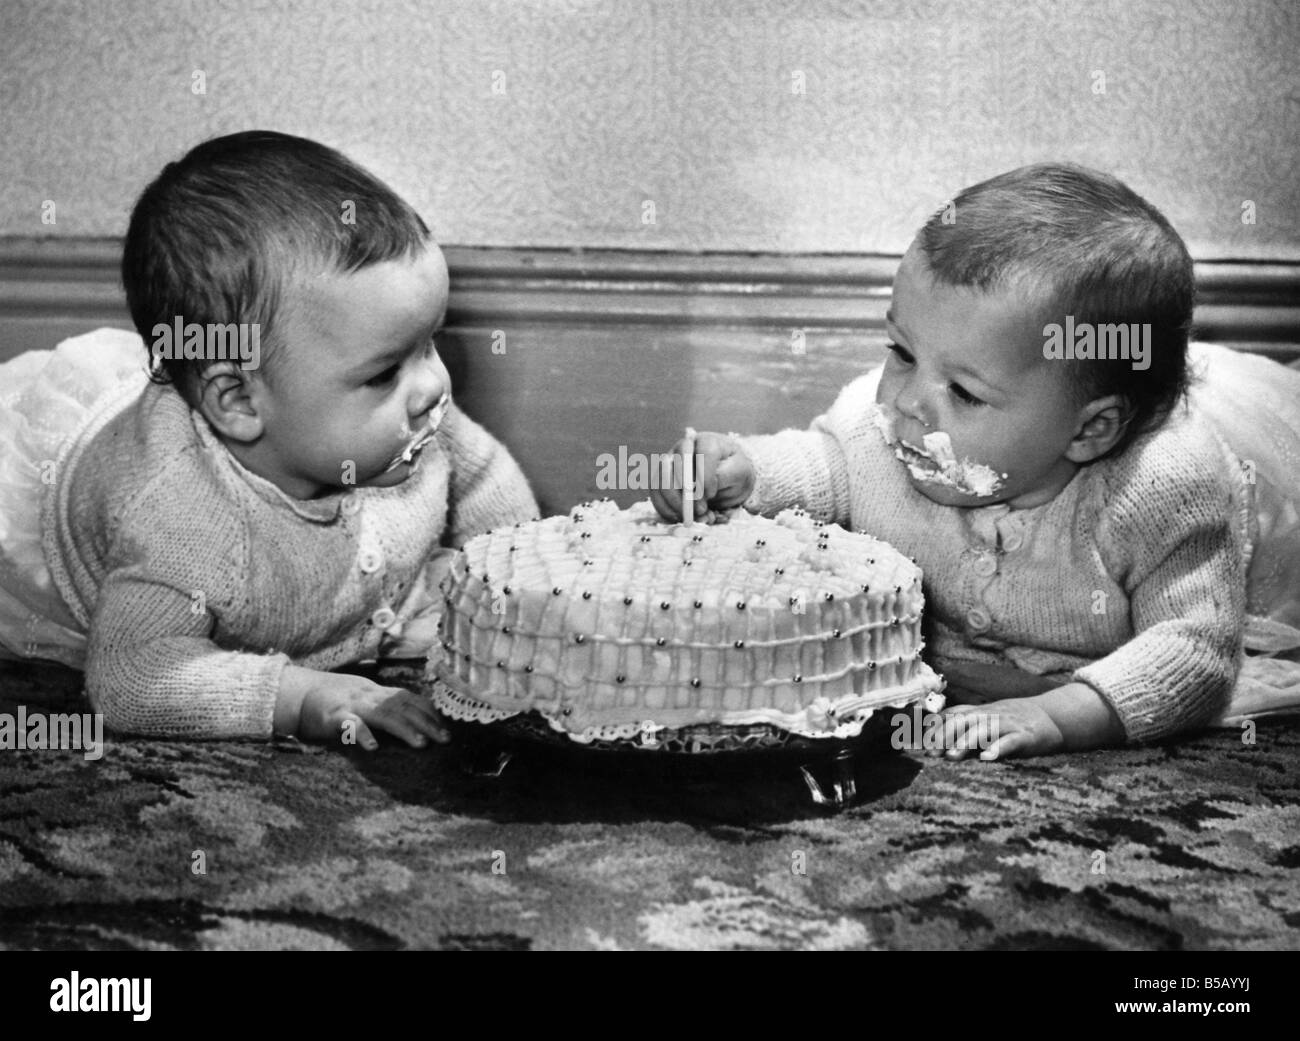 LifeÕs a piece of cake now First birthday for two gurgling babiesÑand how they chuckled as they plunged tiny fingers into the icing on the cake baked by Mum. No-one scoldedÑin fact, Mum and Dad just beamed happily. For this was the birthday of the Òbasket twinsÓ Pamela and Suzanne NicholsonÑwho were so small at birth they were not expected to live. But Grannie Emily Keeble told Mum and Dad to keep hopingÑand she was right. Now Pamela is a hefty 15lb. 10oz. and Suzanne is close behind at 14lb. 9oz Stock Photo